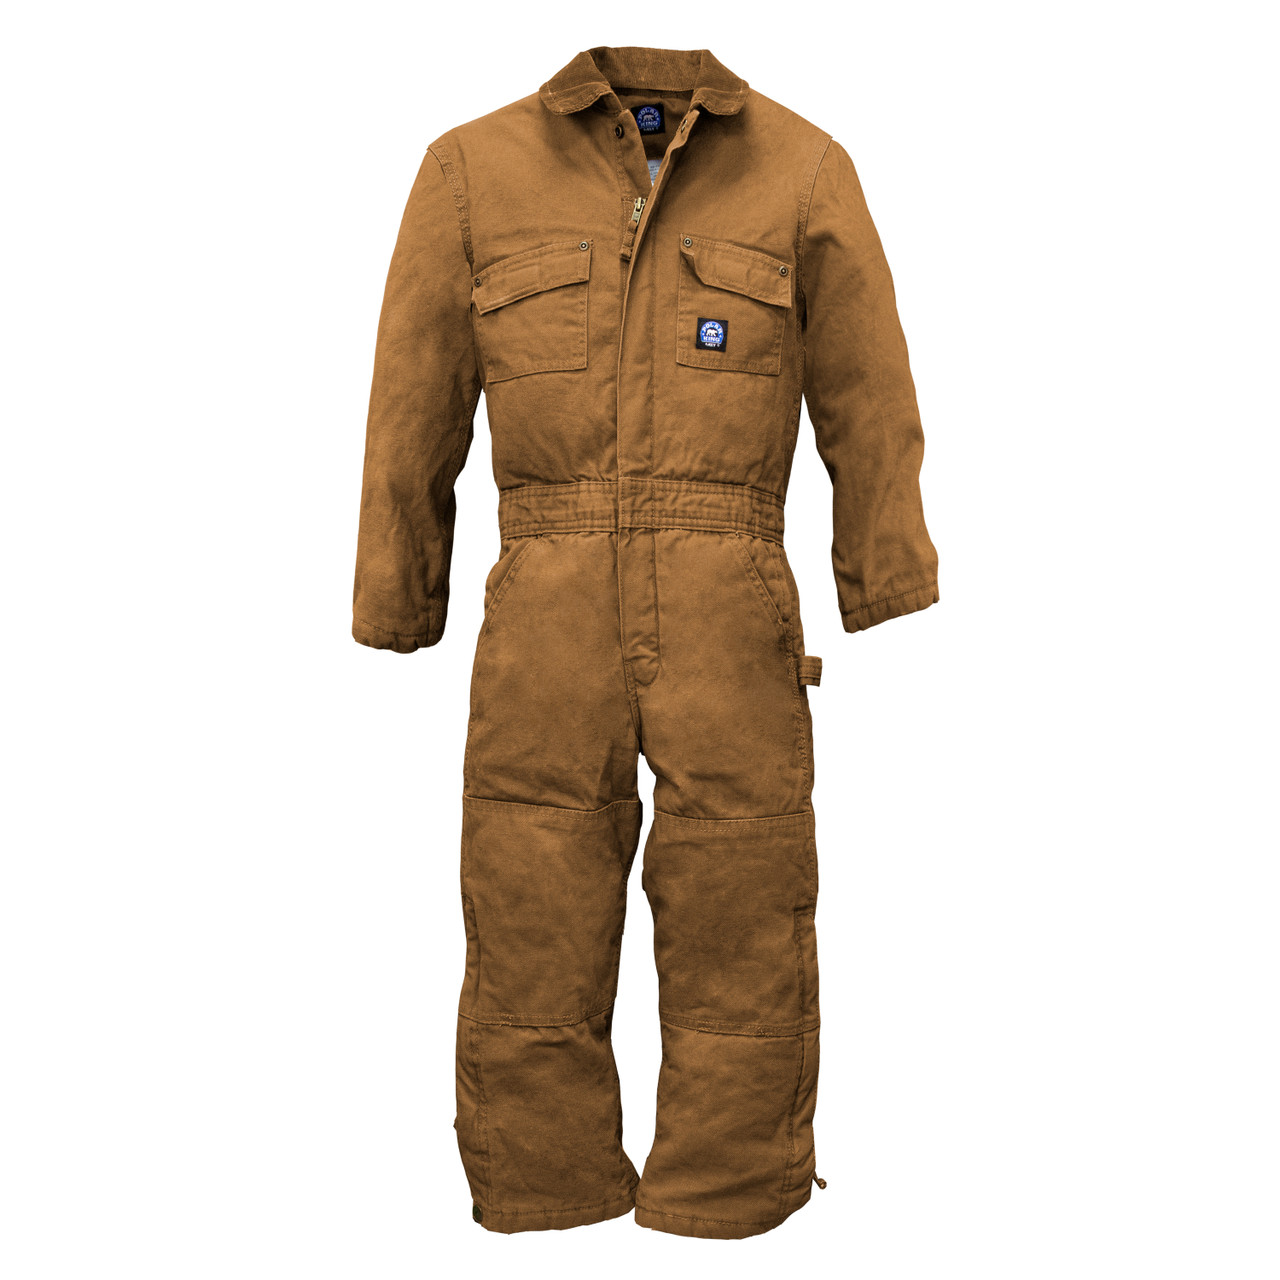 https://cdn11.bigcommerce.com/s-r4f6haoaux/images/stencil/1280x1280/products/253/790/youth-insulated-duck-coverall-saddle-Polar-King-959-28-front__74411.1583420456.jpg?c=1